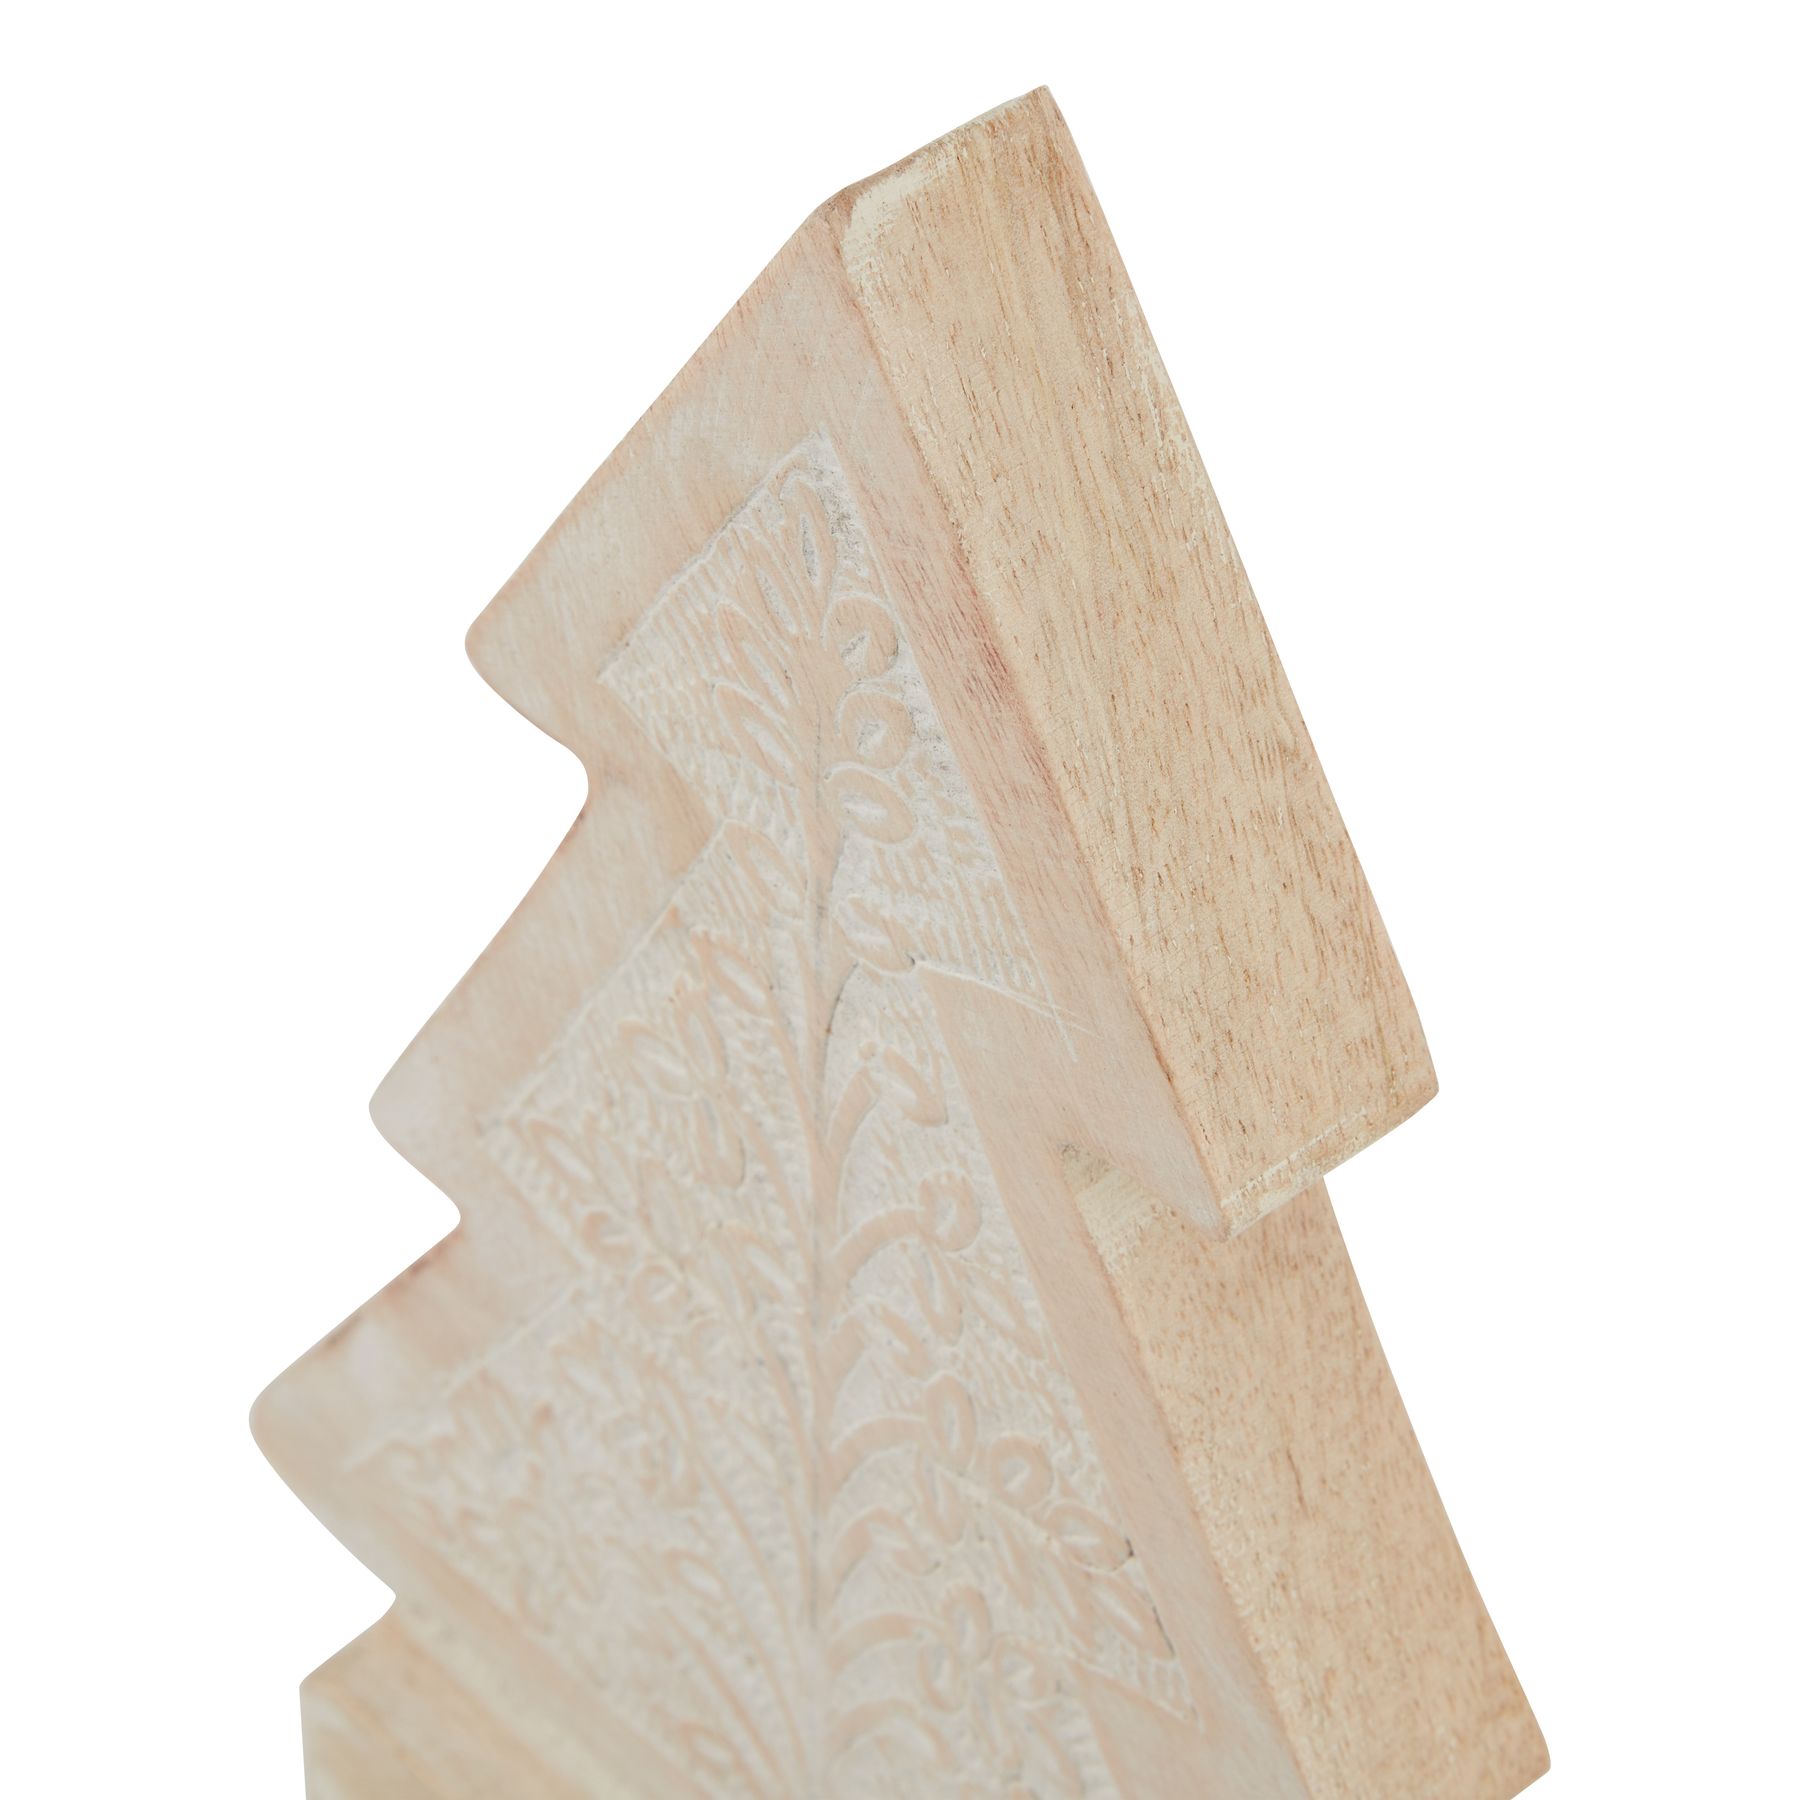 White Wash Collection Wooden Patterned Decorative Tree - Image 3